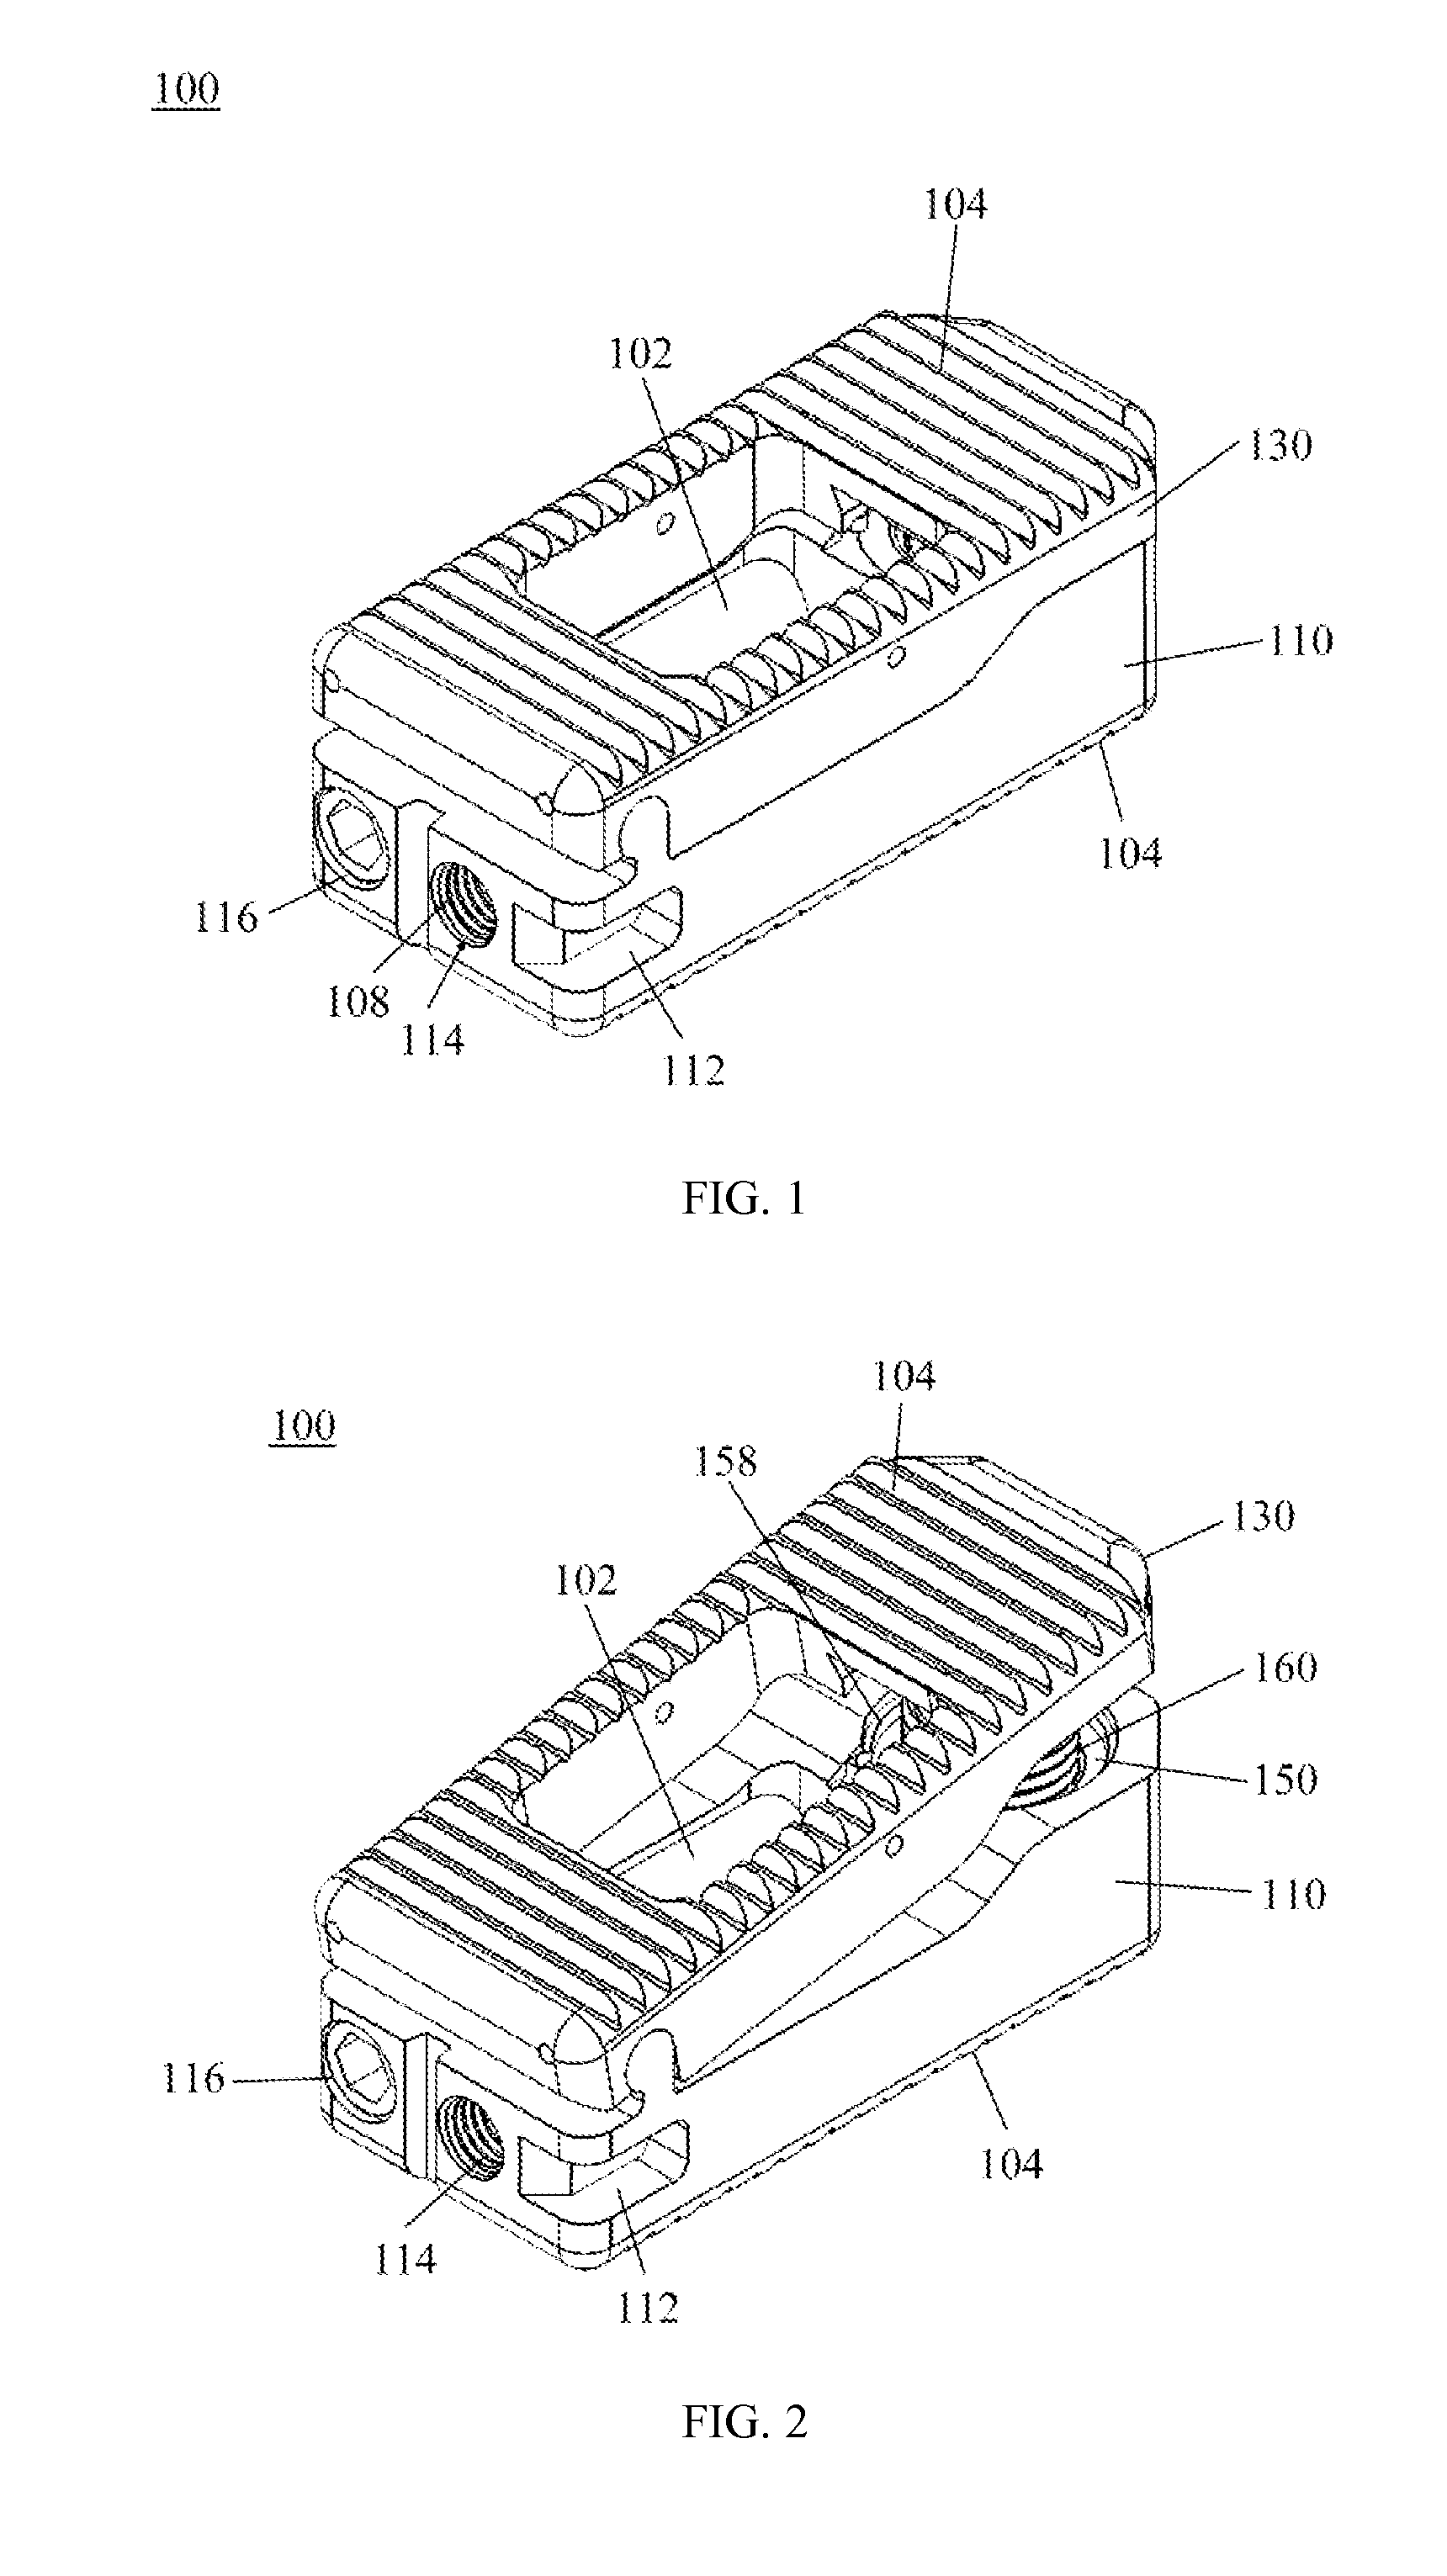 Adjustable interbody fusion device and method of use